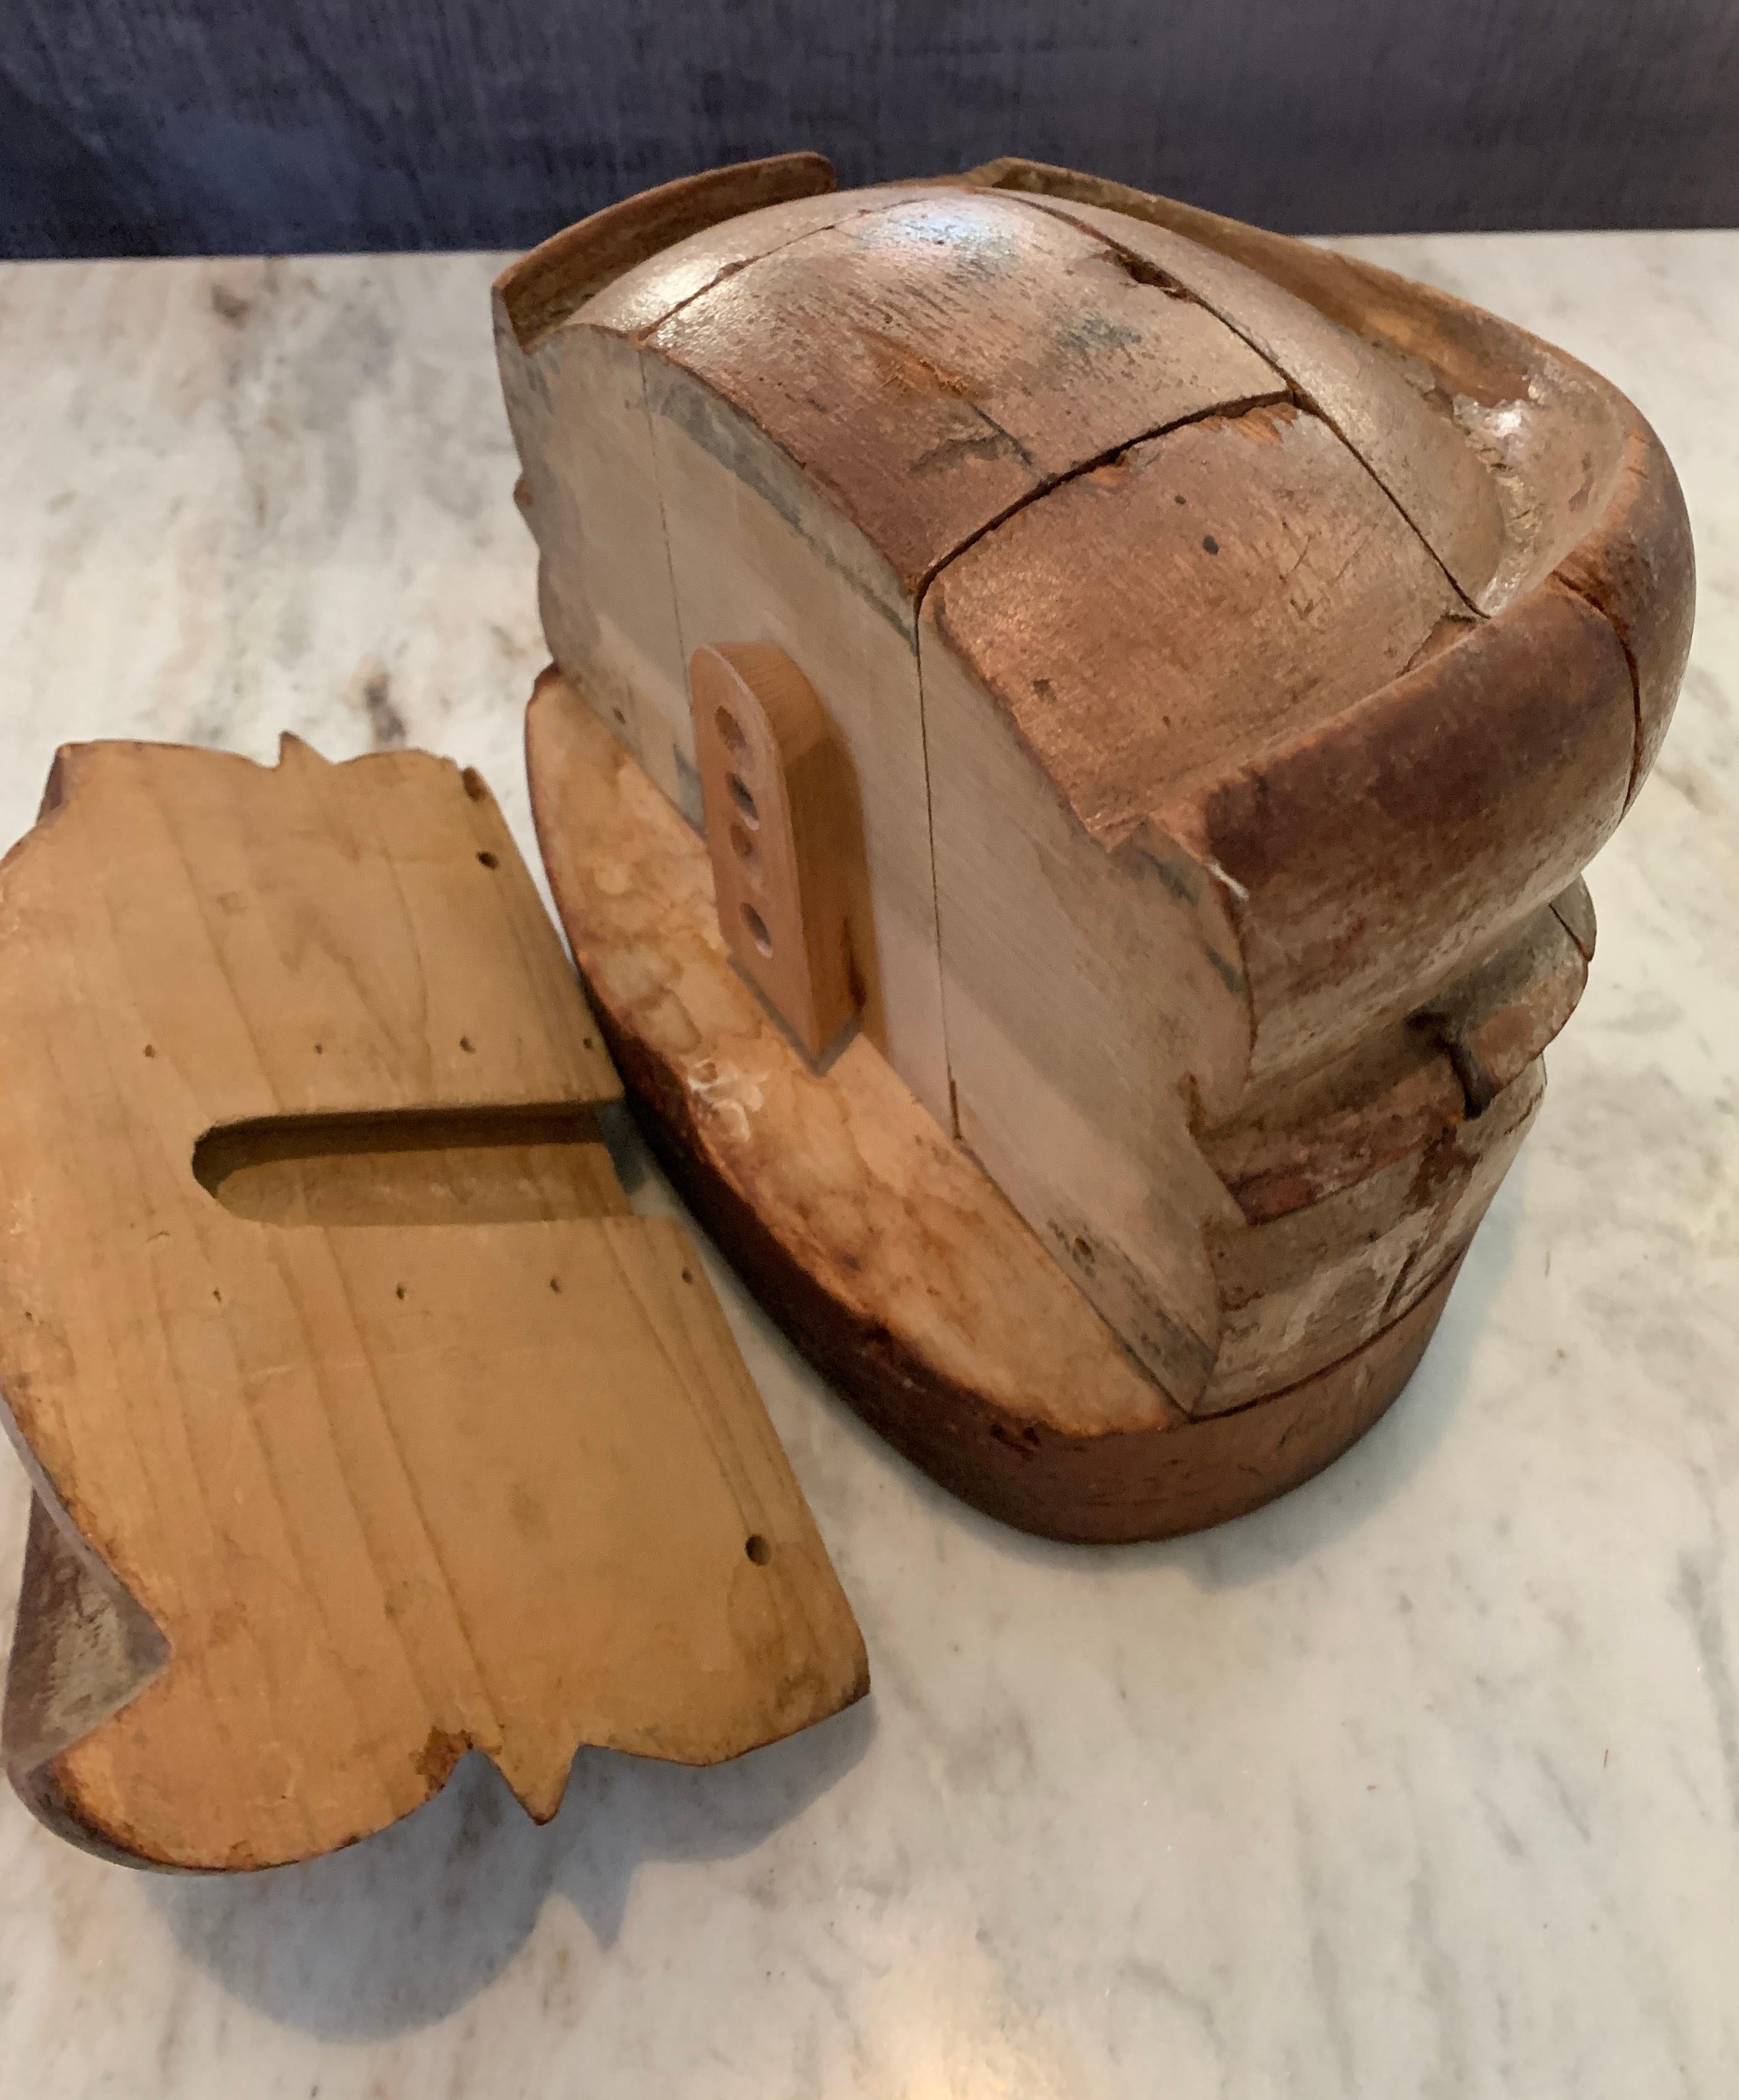 Wooden adjustable French vintage Milliner hat form. Great for use as a hat rack, a bookend or decorative item. The form, like a puzzle, comes apart. All wood and wonderful patina.